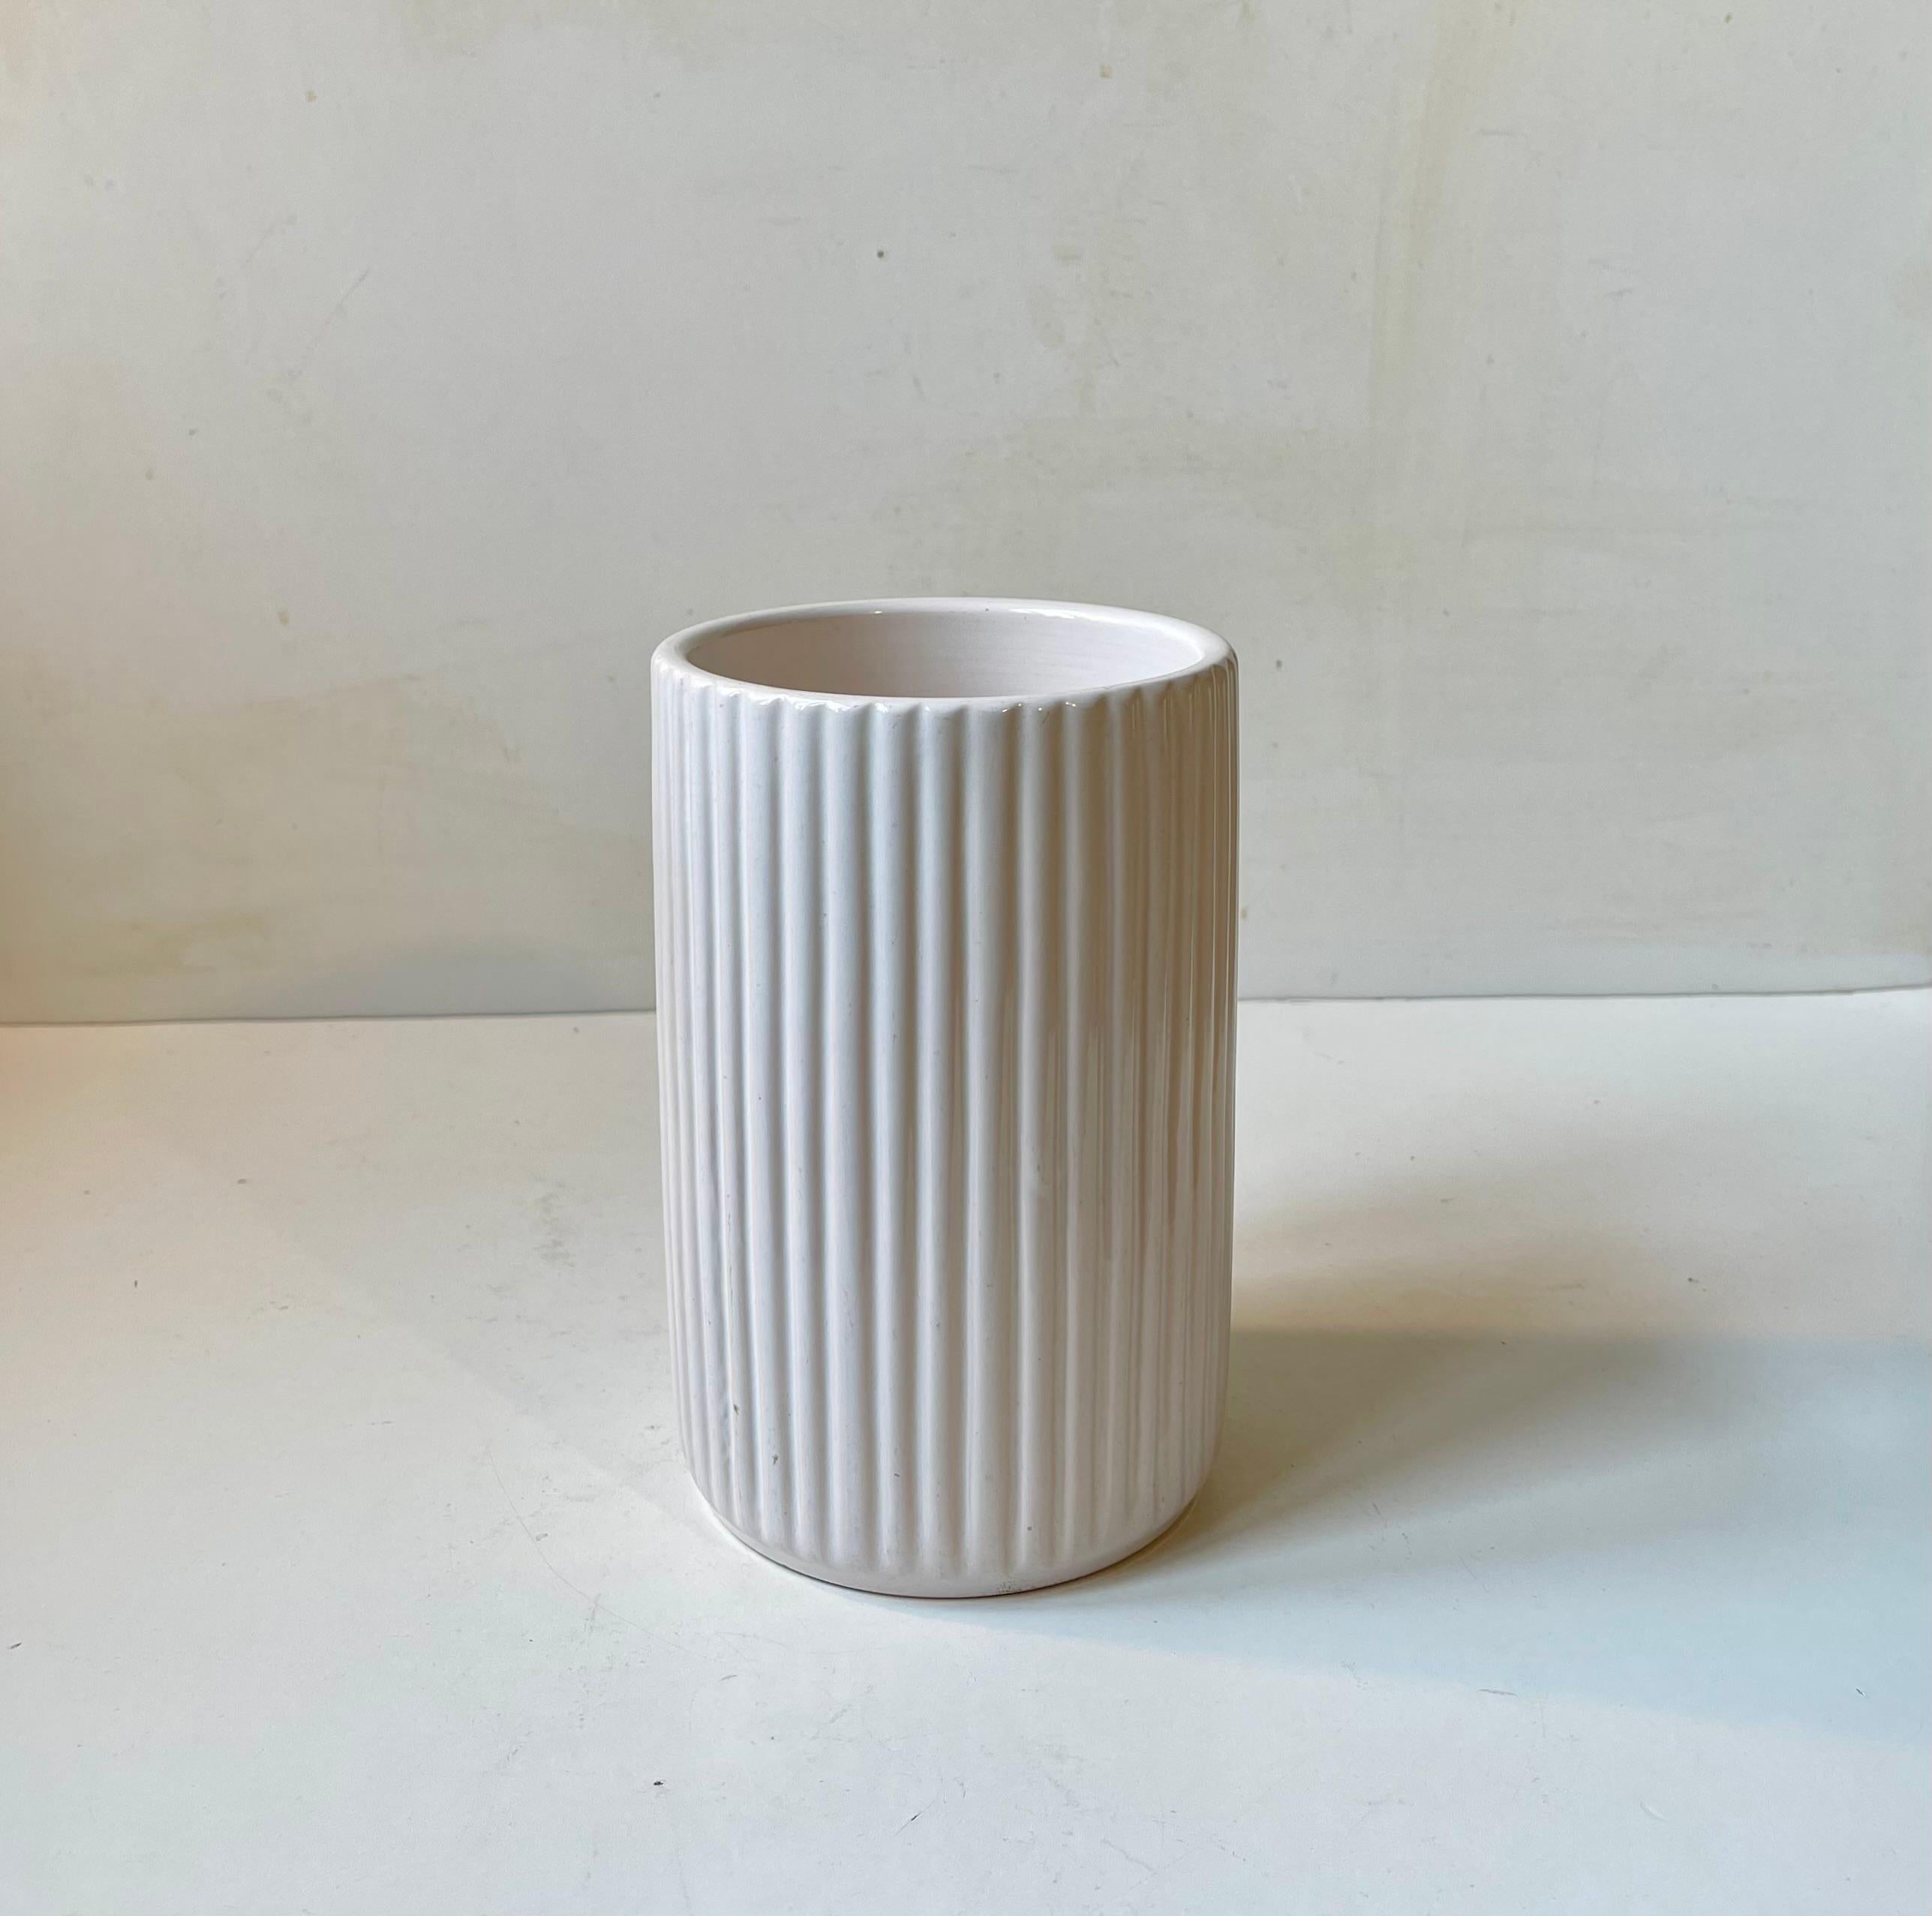 Glazed Fluted Architectural Ceramic Vase in White Glaze by L. Hjorth, 1940s For Sale